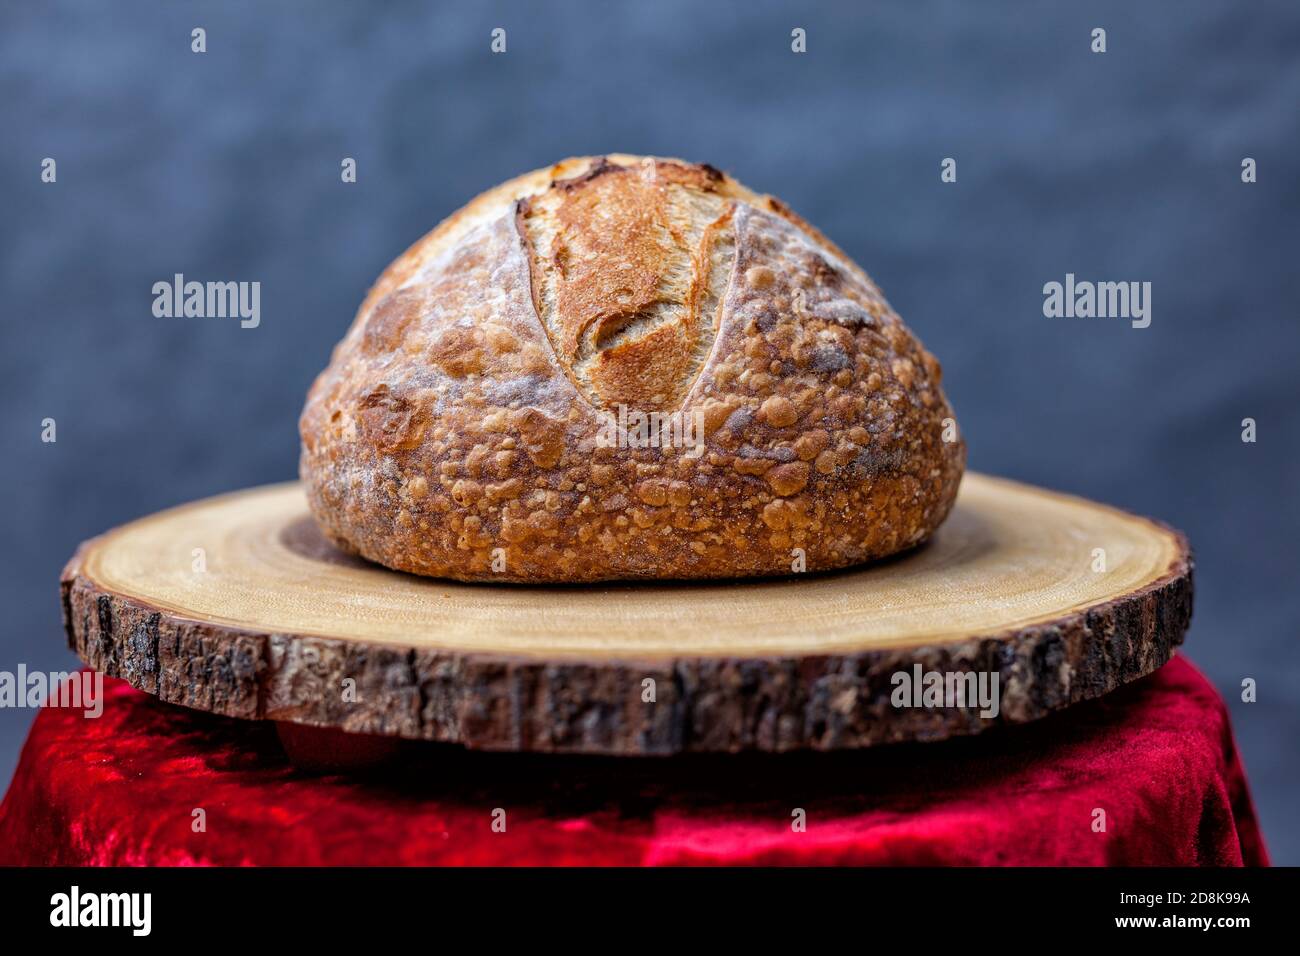 Artisan loaf of traditional Homemade sourdough Boule bread with crust on a wooden board Stock Photo